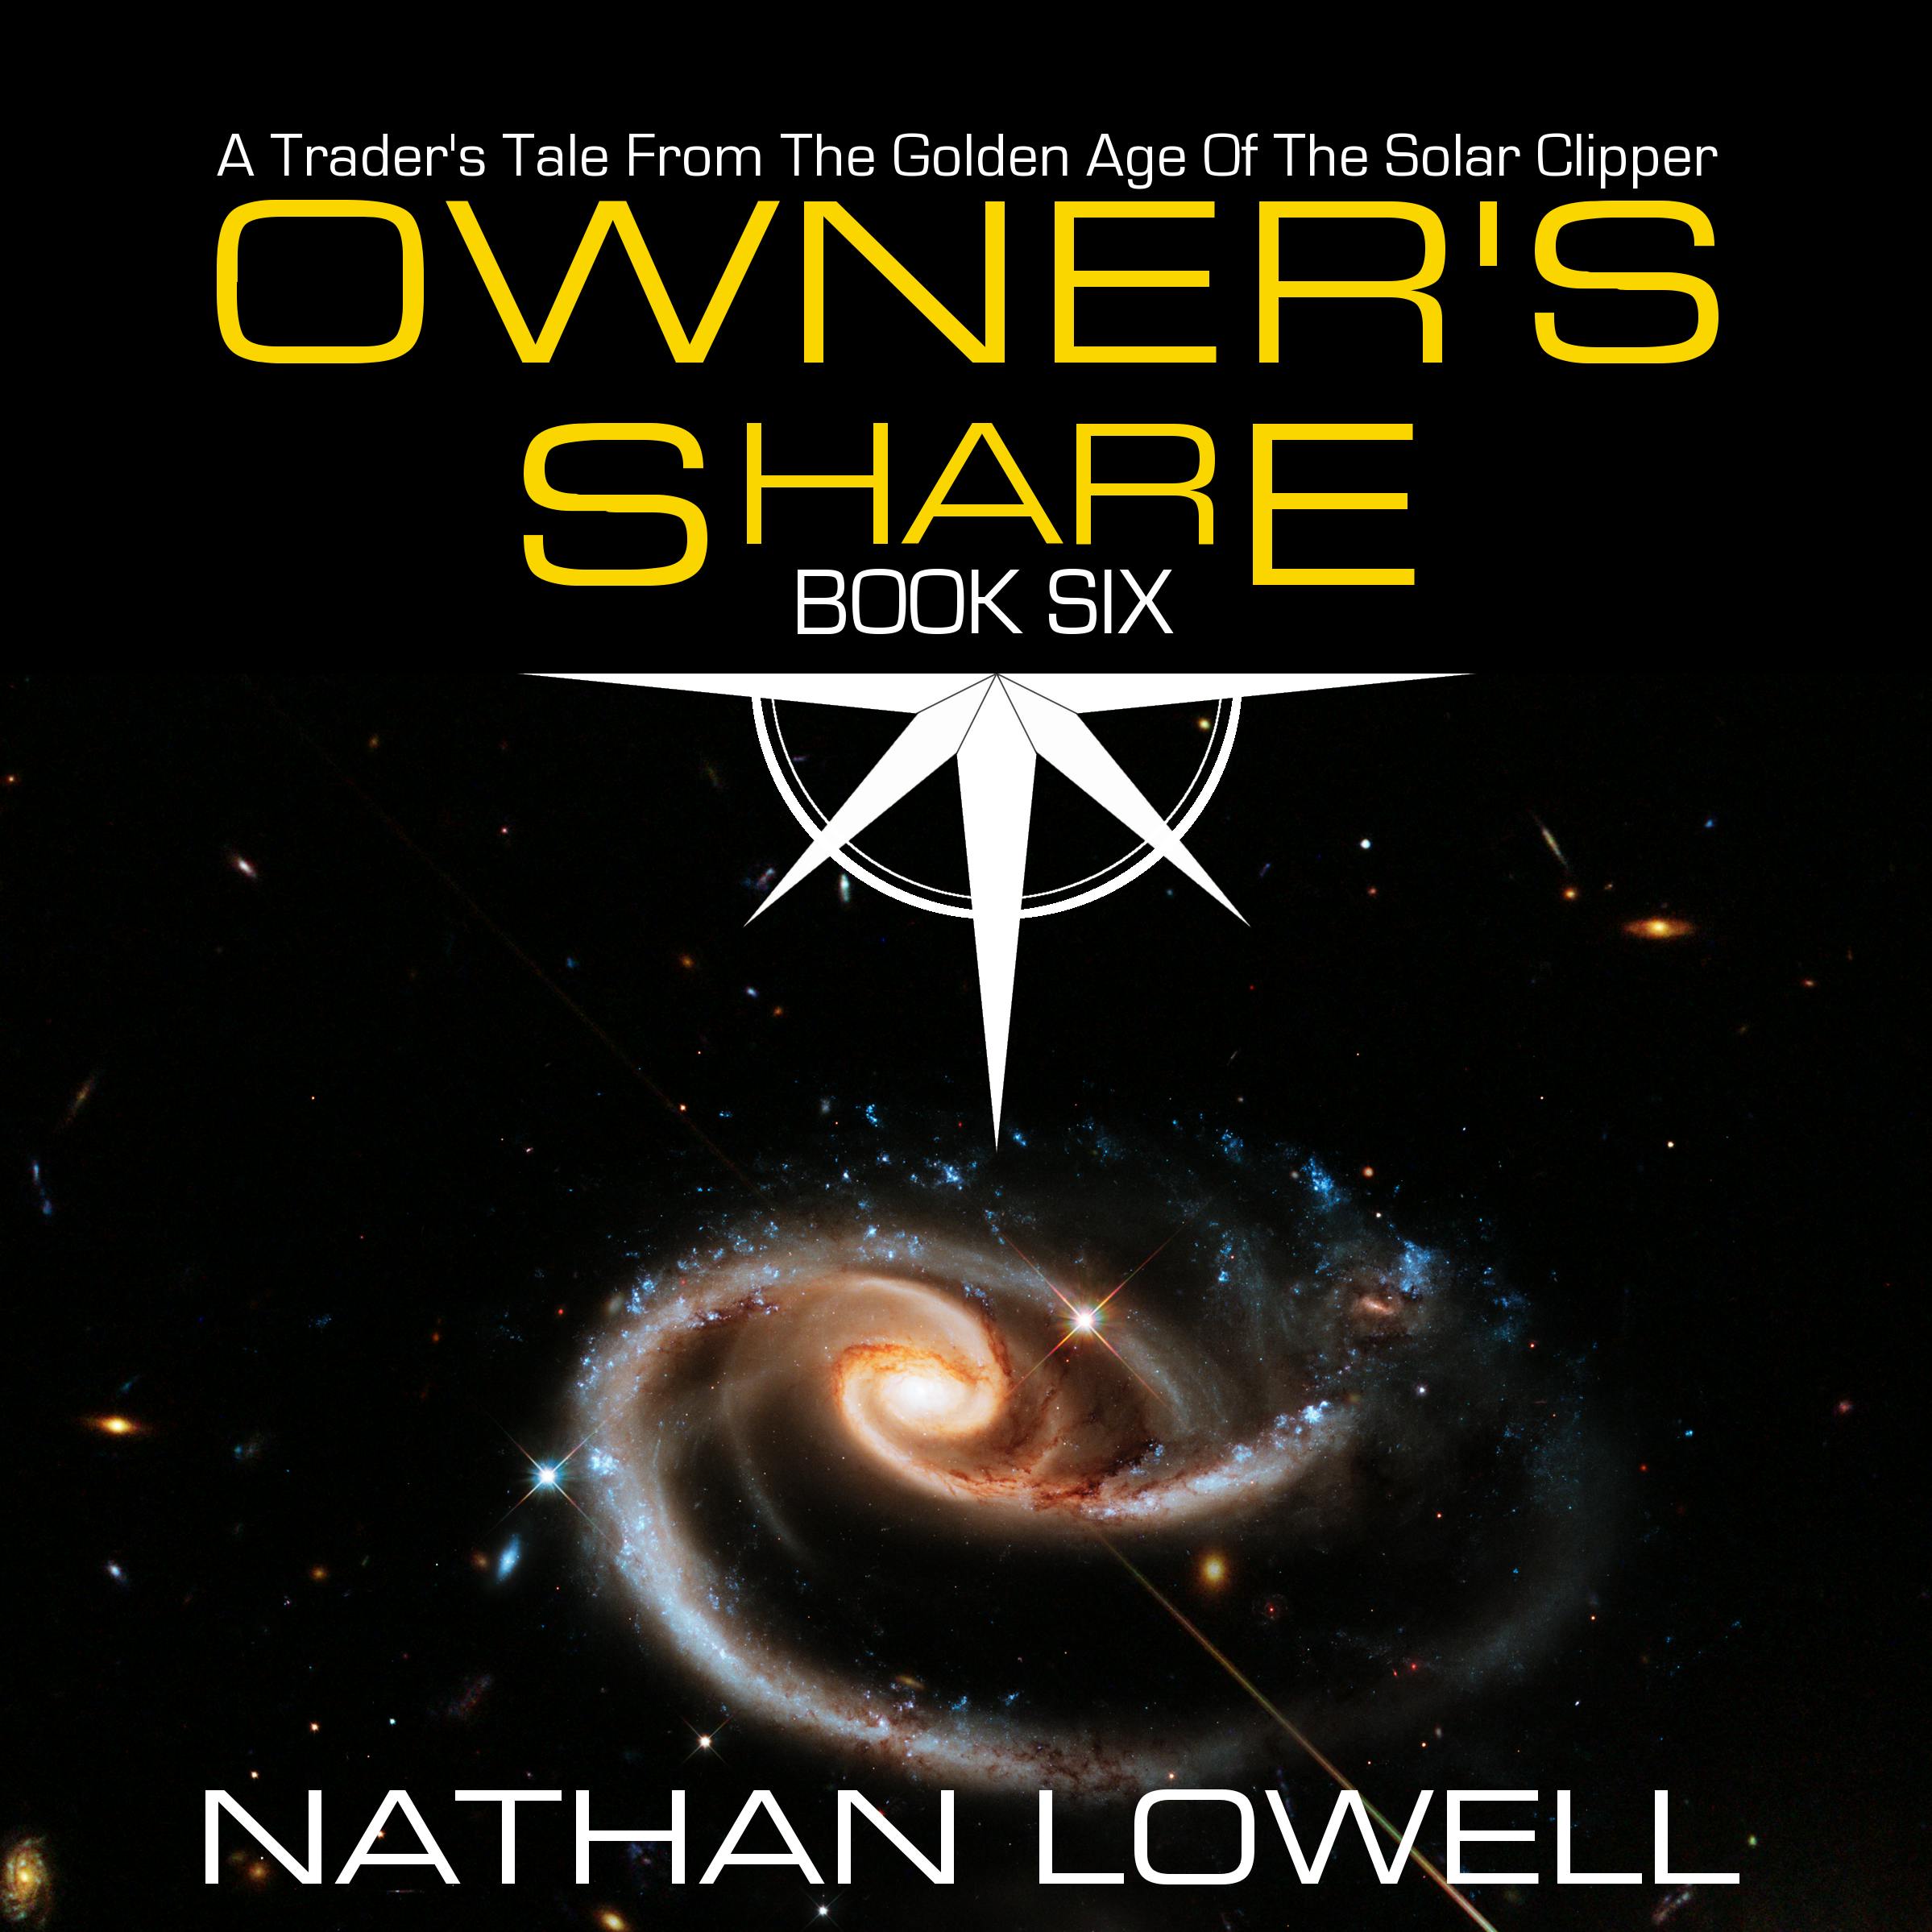 Owner's Share:Nathan Lowell | Scribl